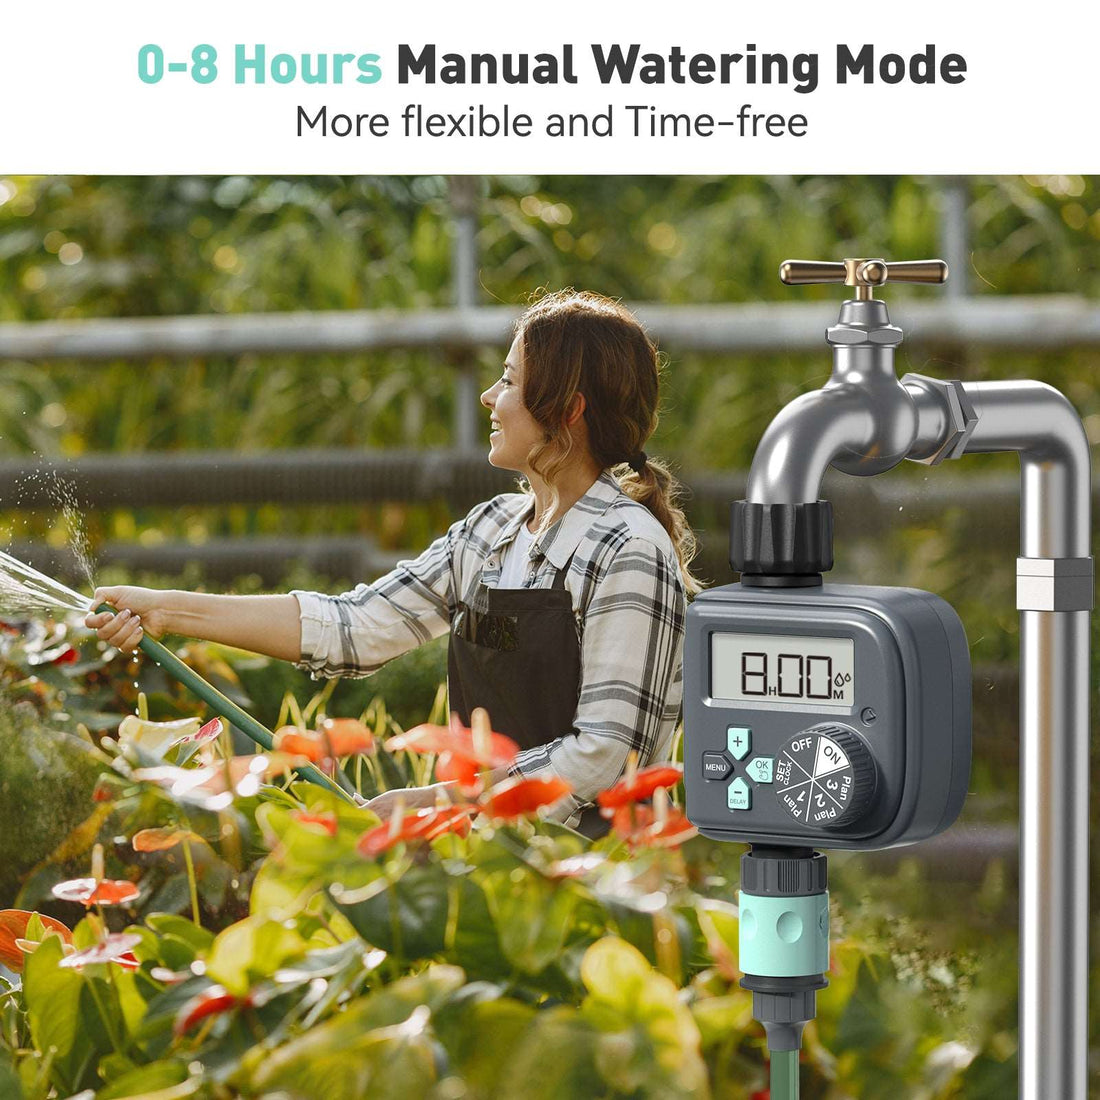 0-8 Hours Manual Watering ModeMore flexible and Time-free